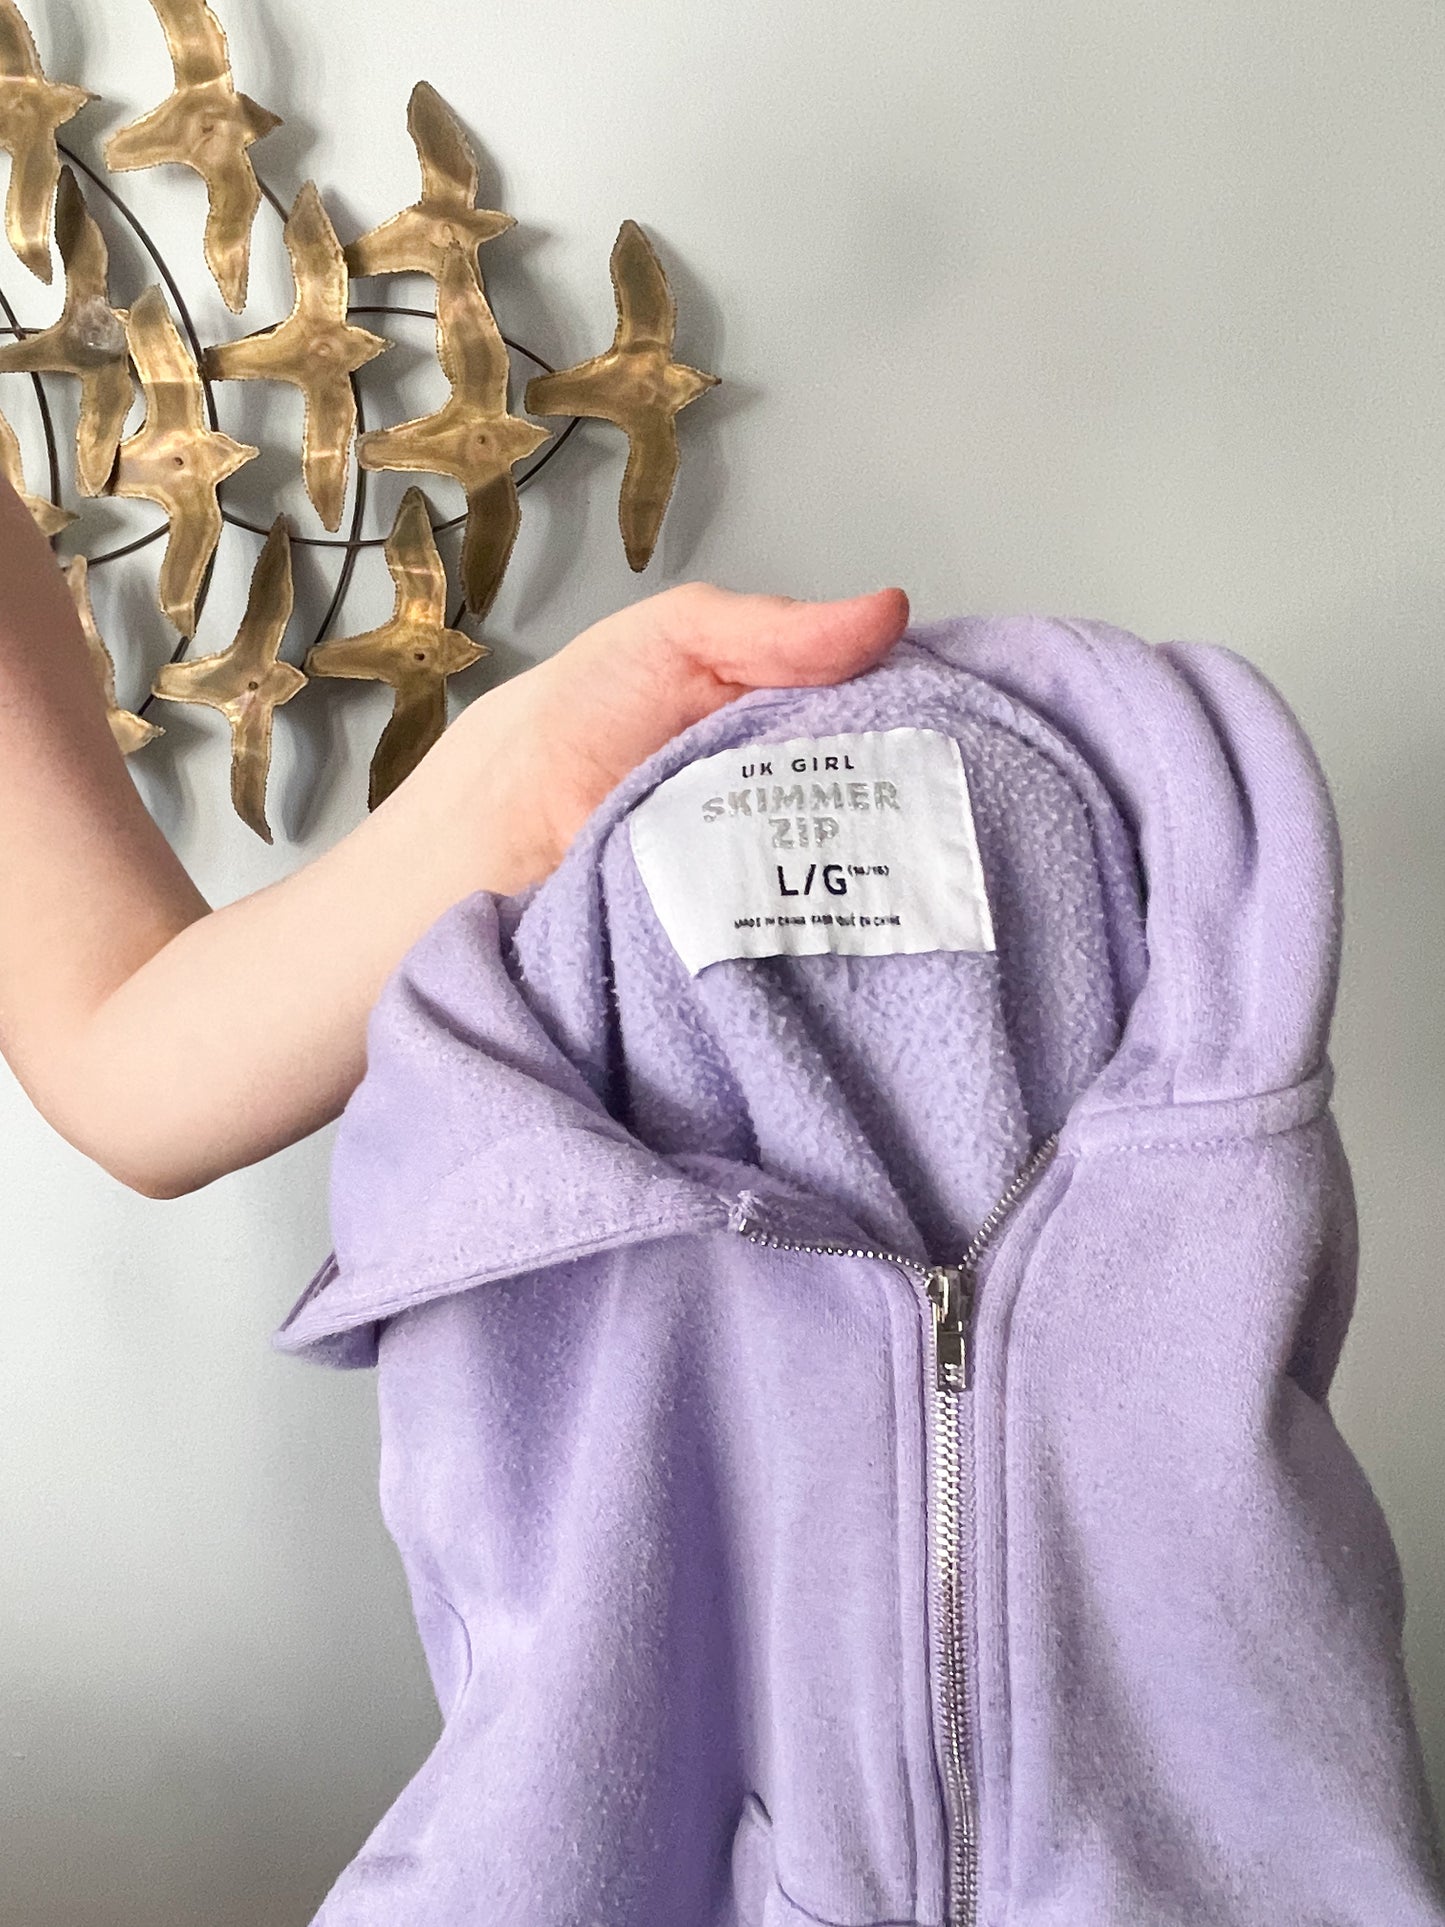 UK Girl Skimmer Lilac Cropped Zipper Hoodie - Small